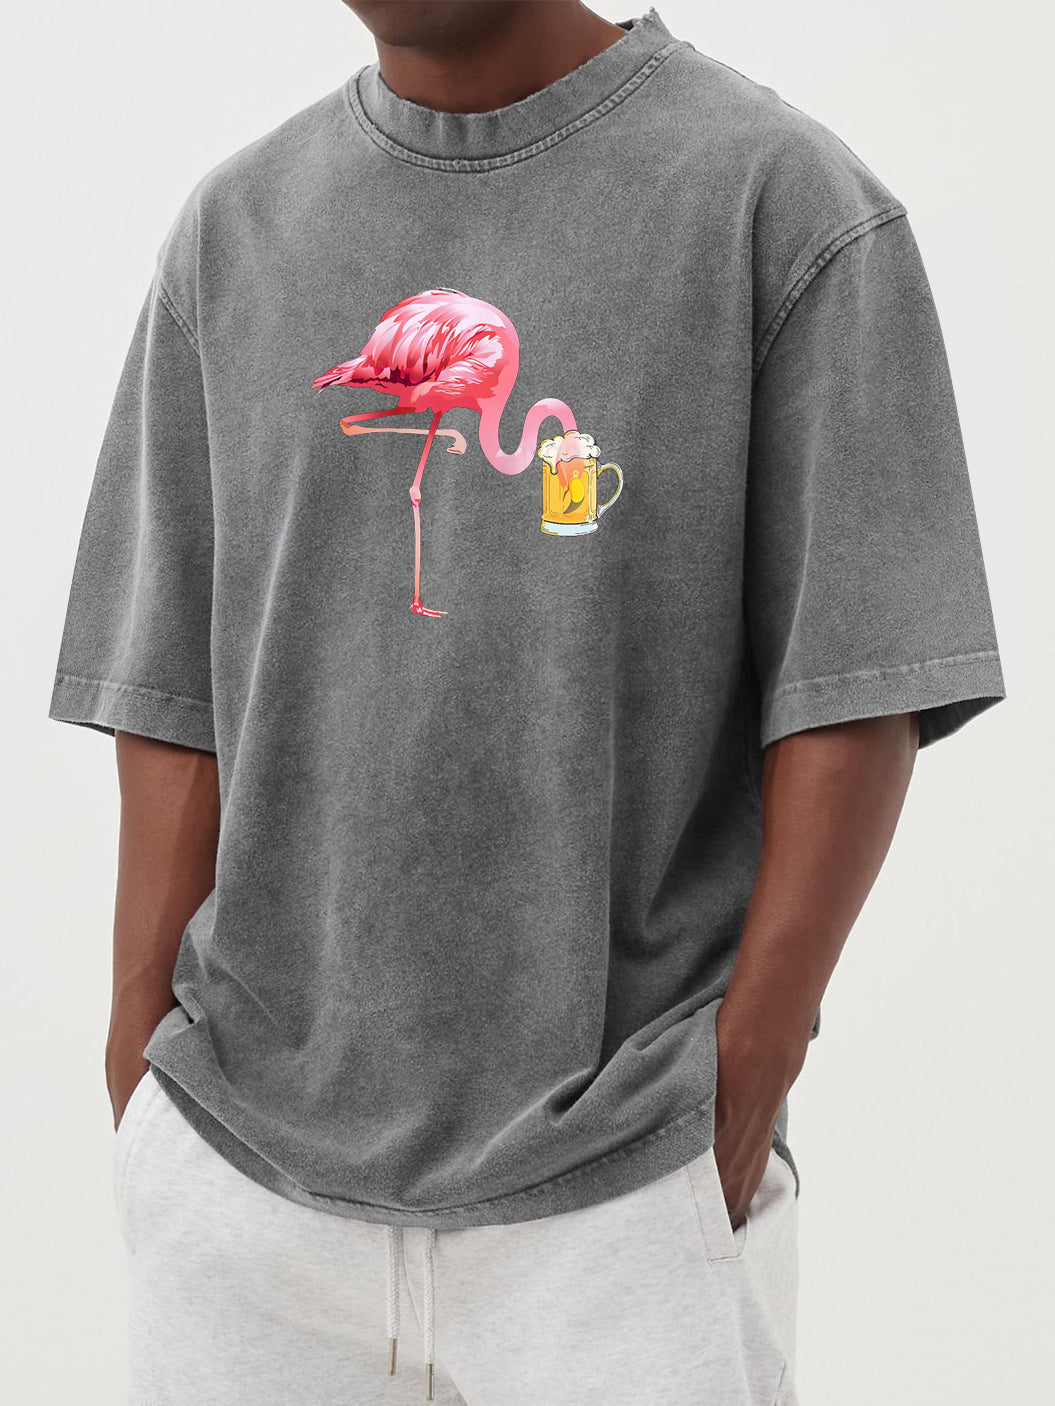 Men's Flamingo Beer Print Washed Distressed Cotton T-Shirt Top